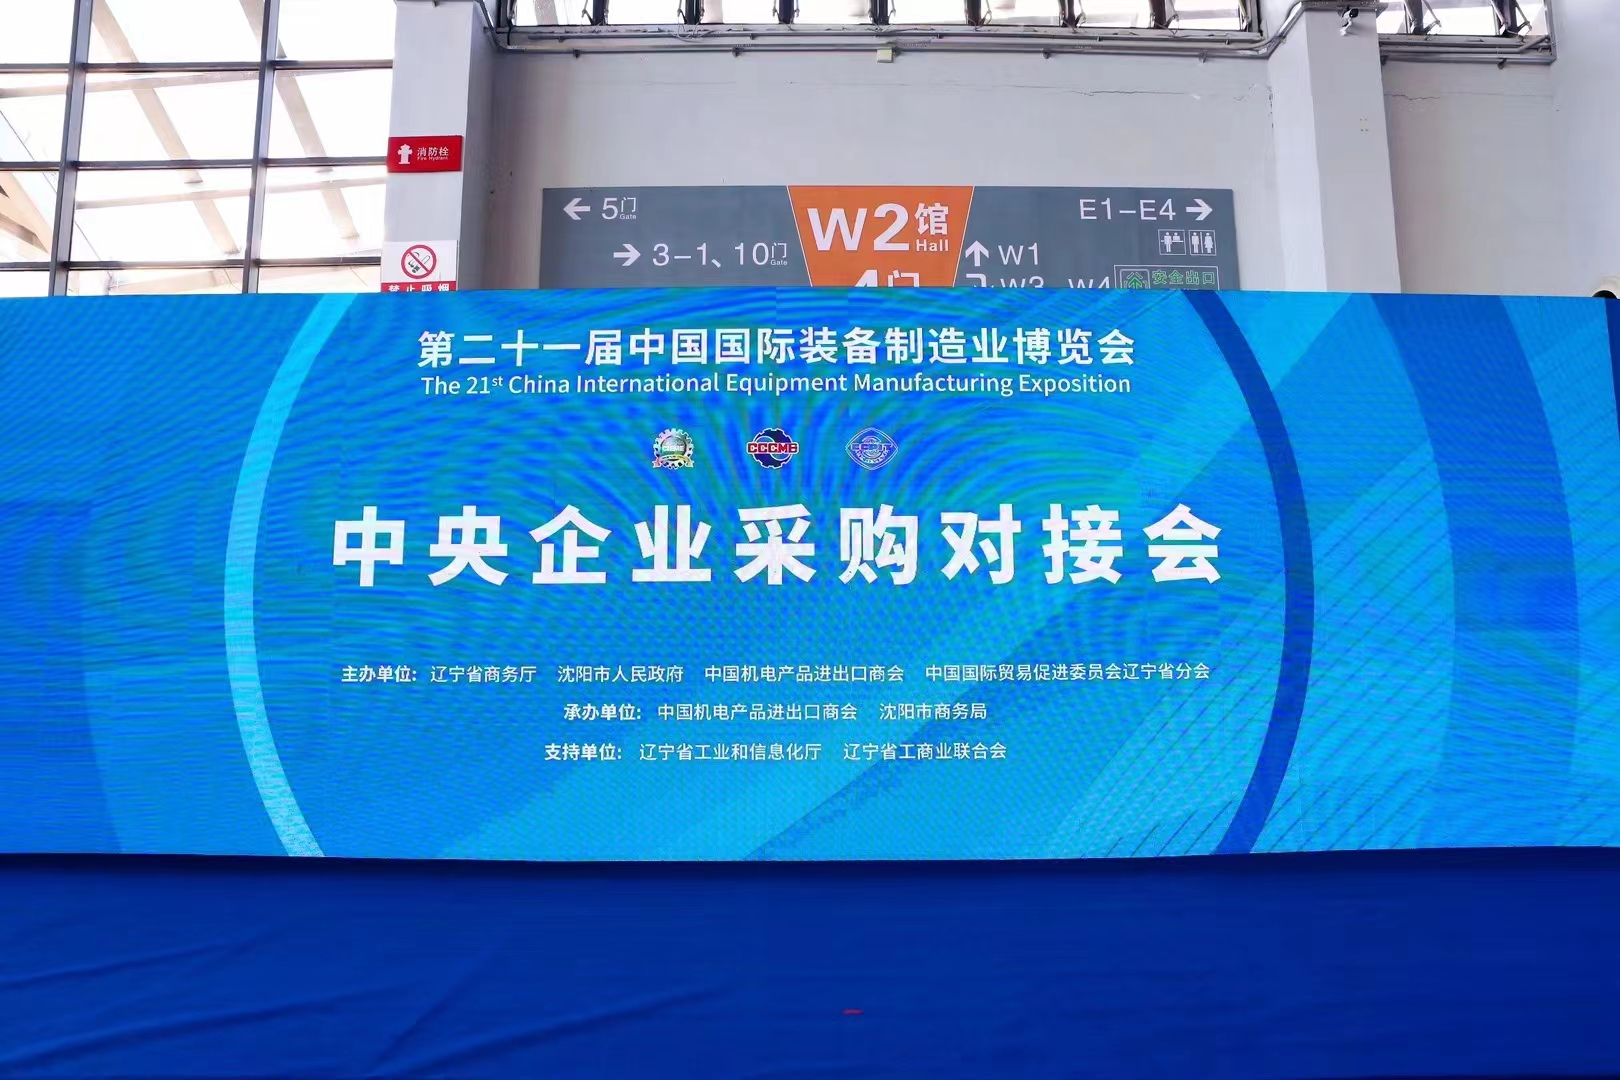 The 21st China International Equipment Manufacturing Exposition